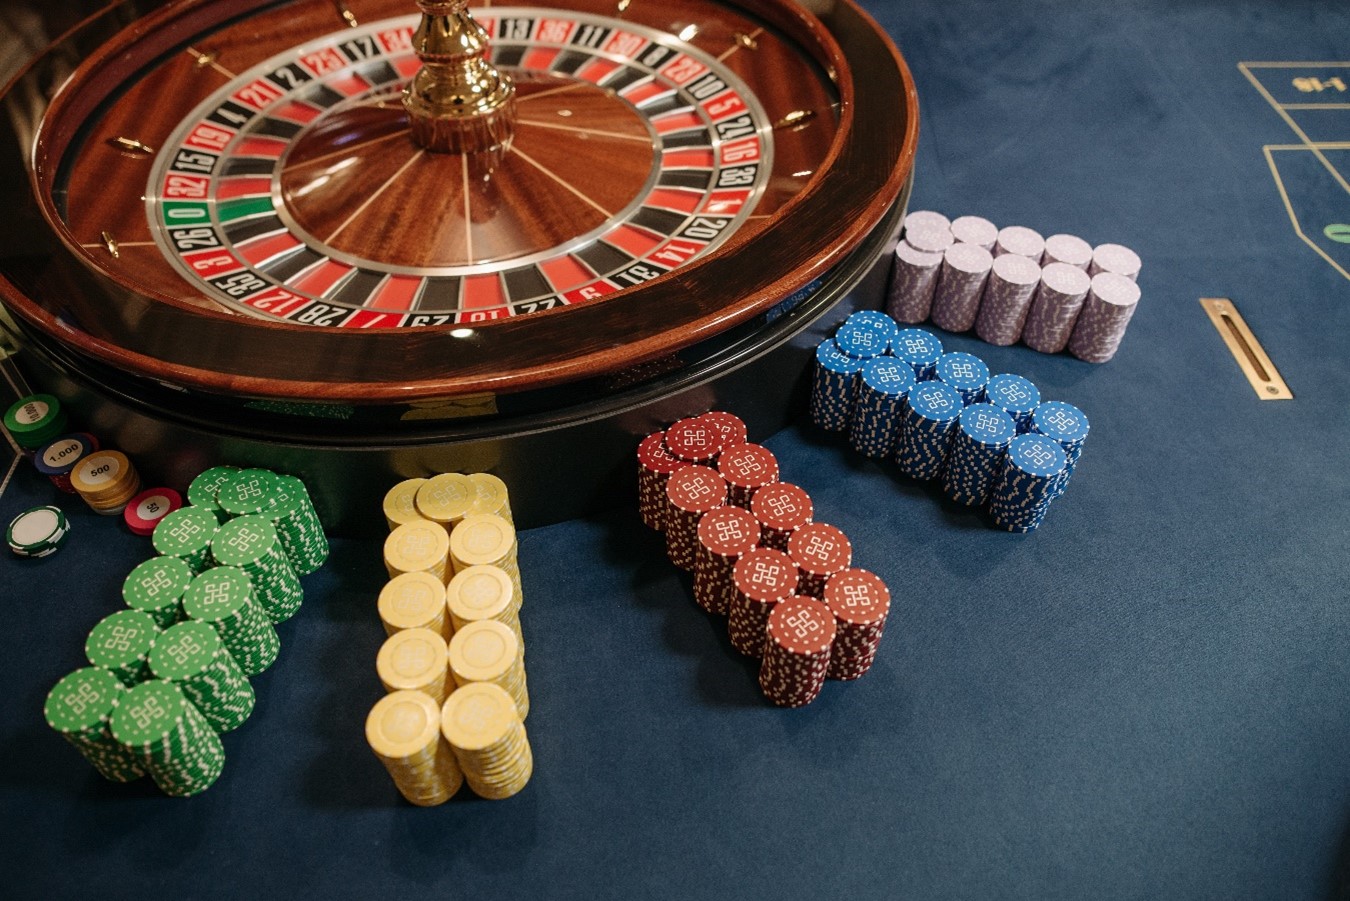 Photo by Pavel Danilyuk: https://www.pexels.com/photo/close-up-photo-of-stacked-poker-chips-beside-casino-roulette-7594188/